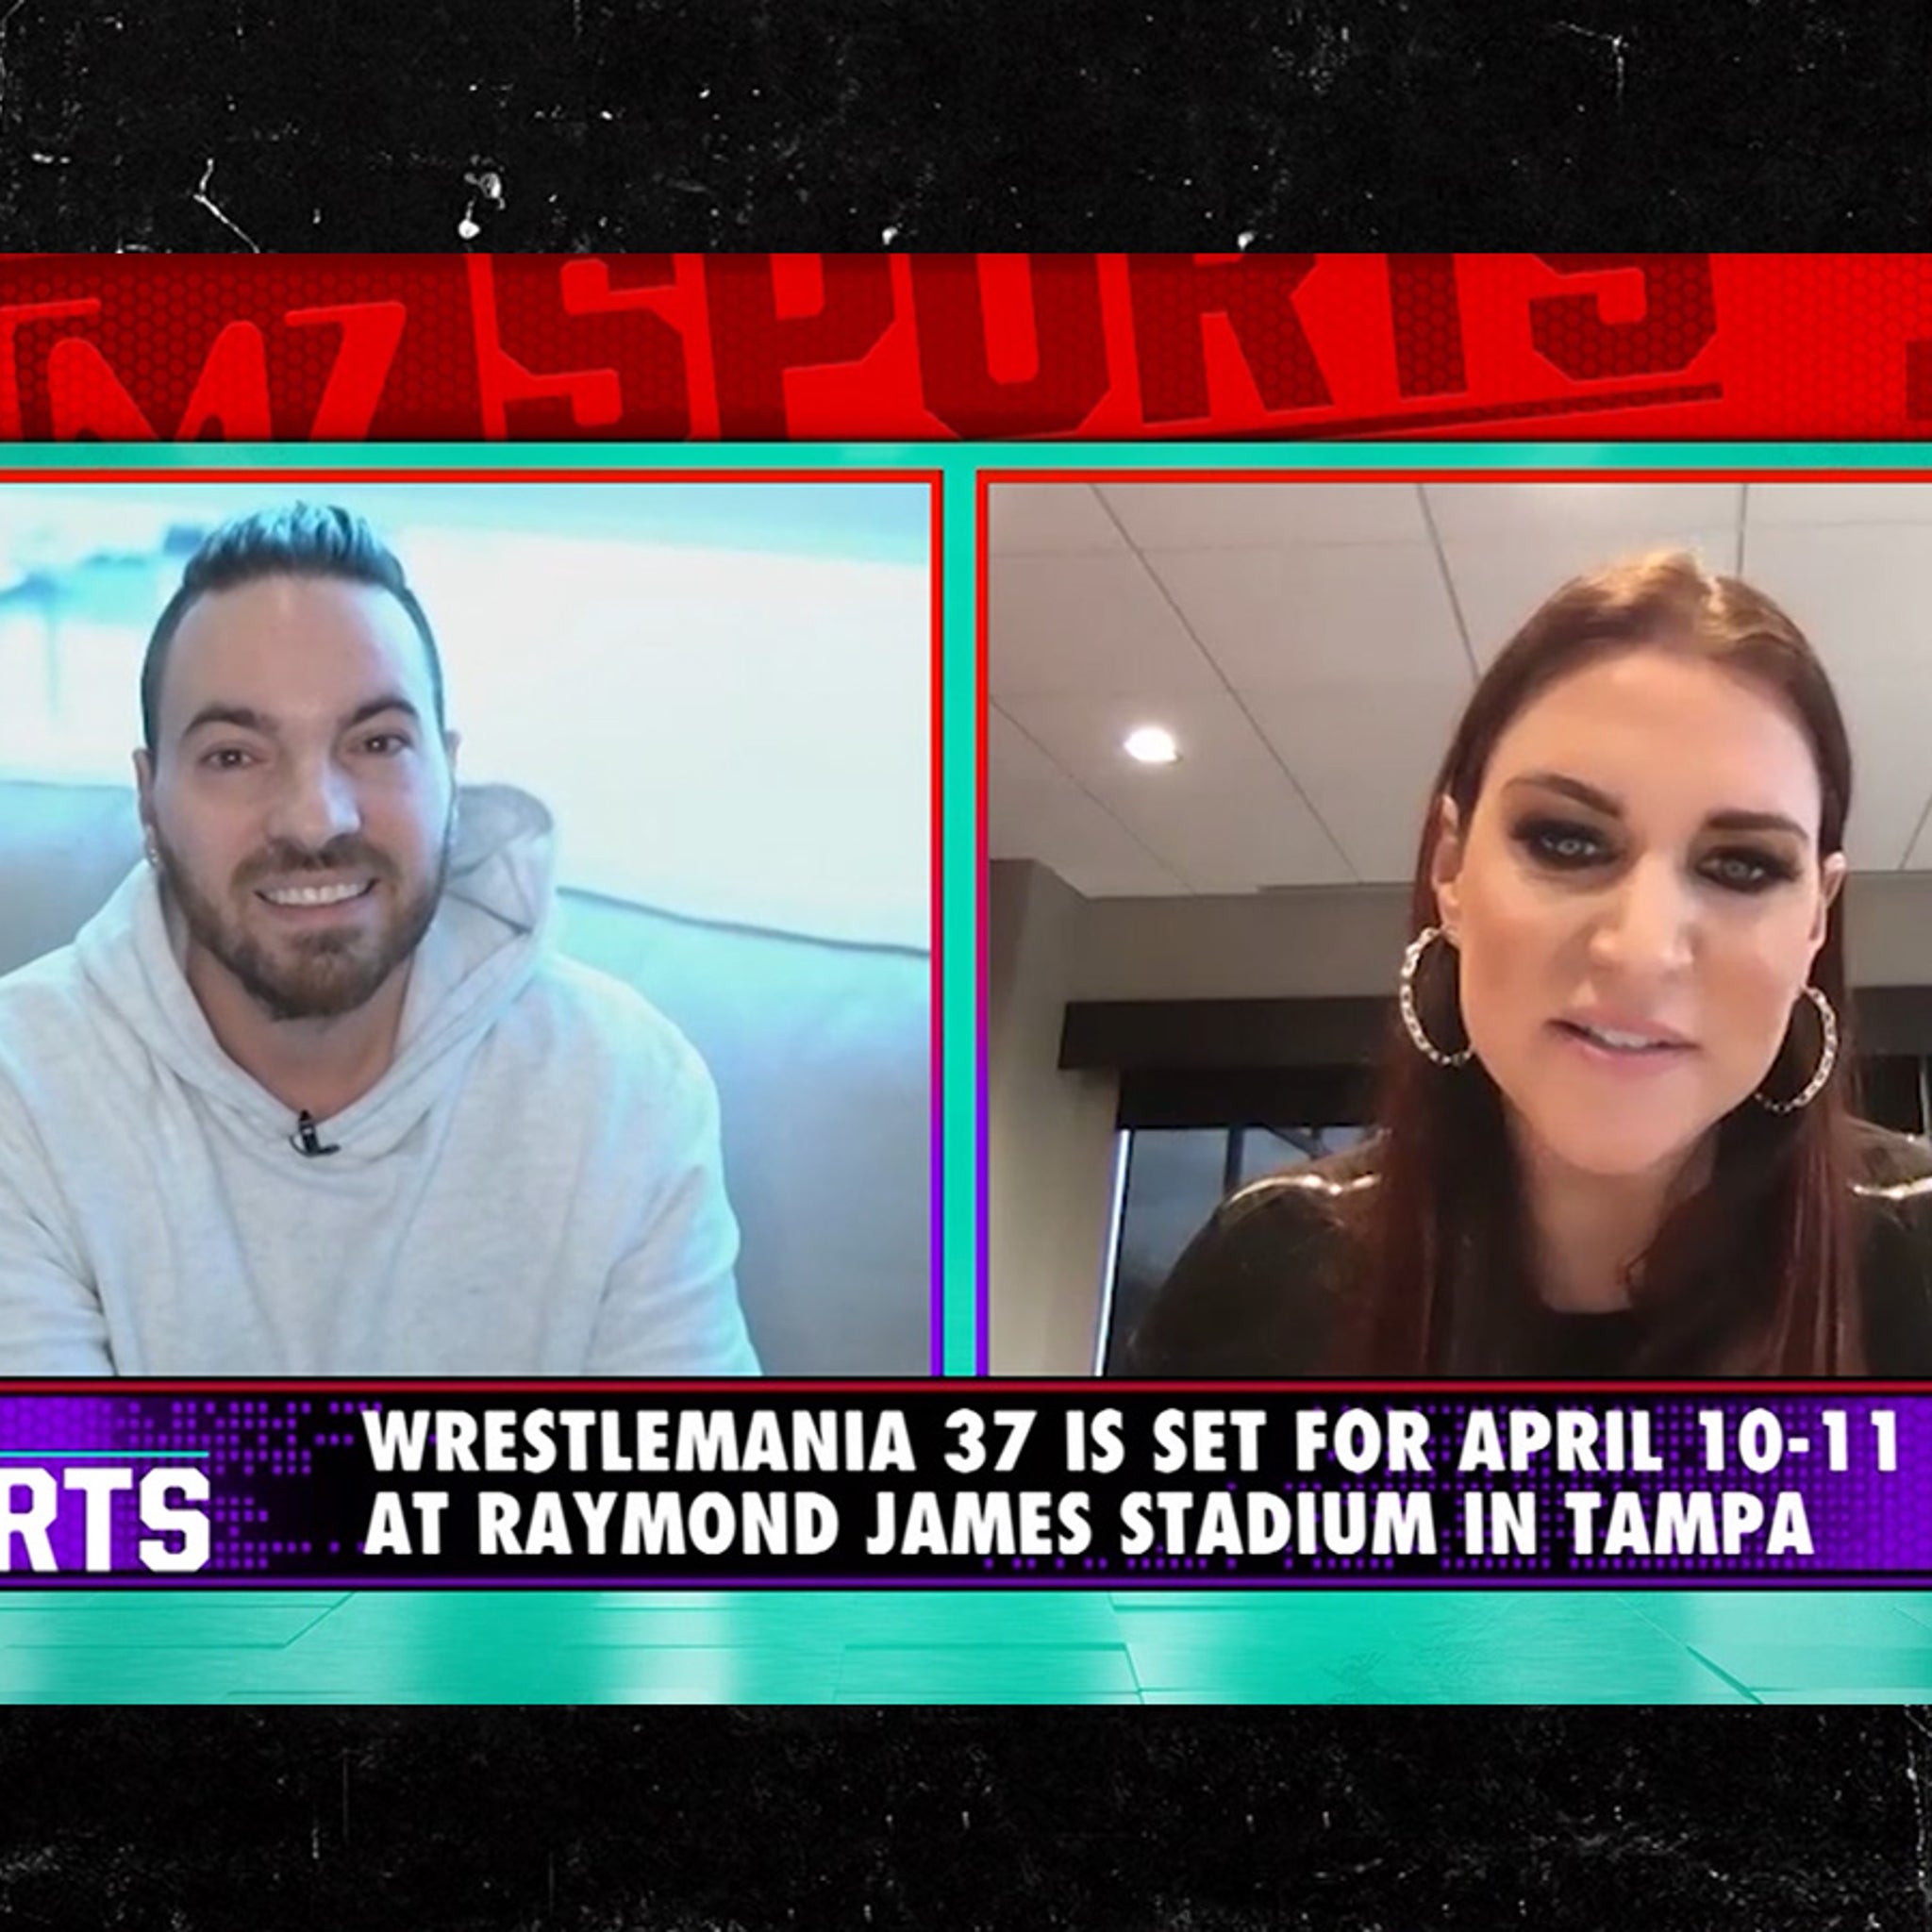 Stephanie Mcmahon Says Wwe Plans To Have Live Audience At Wrestlemania 37